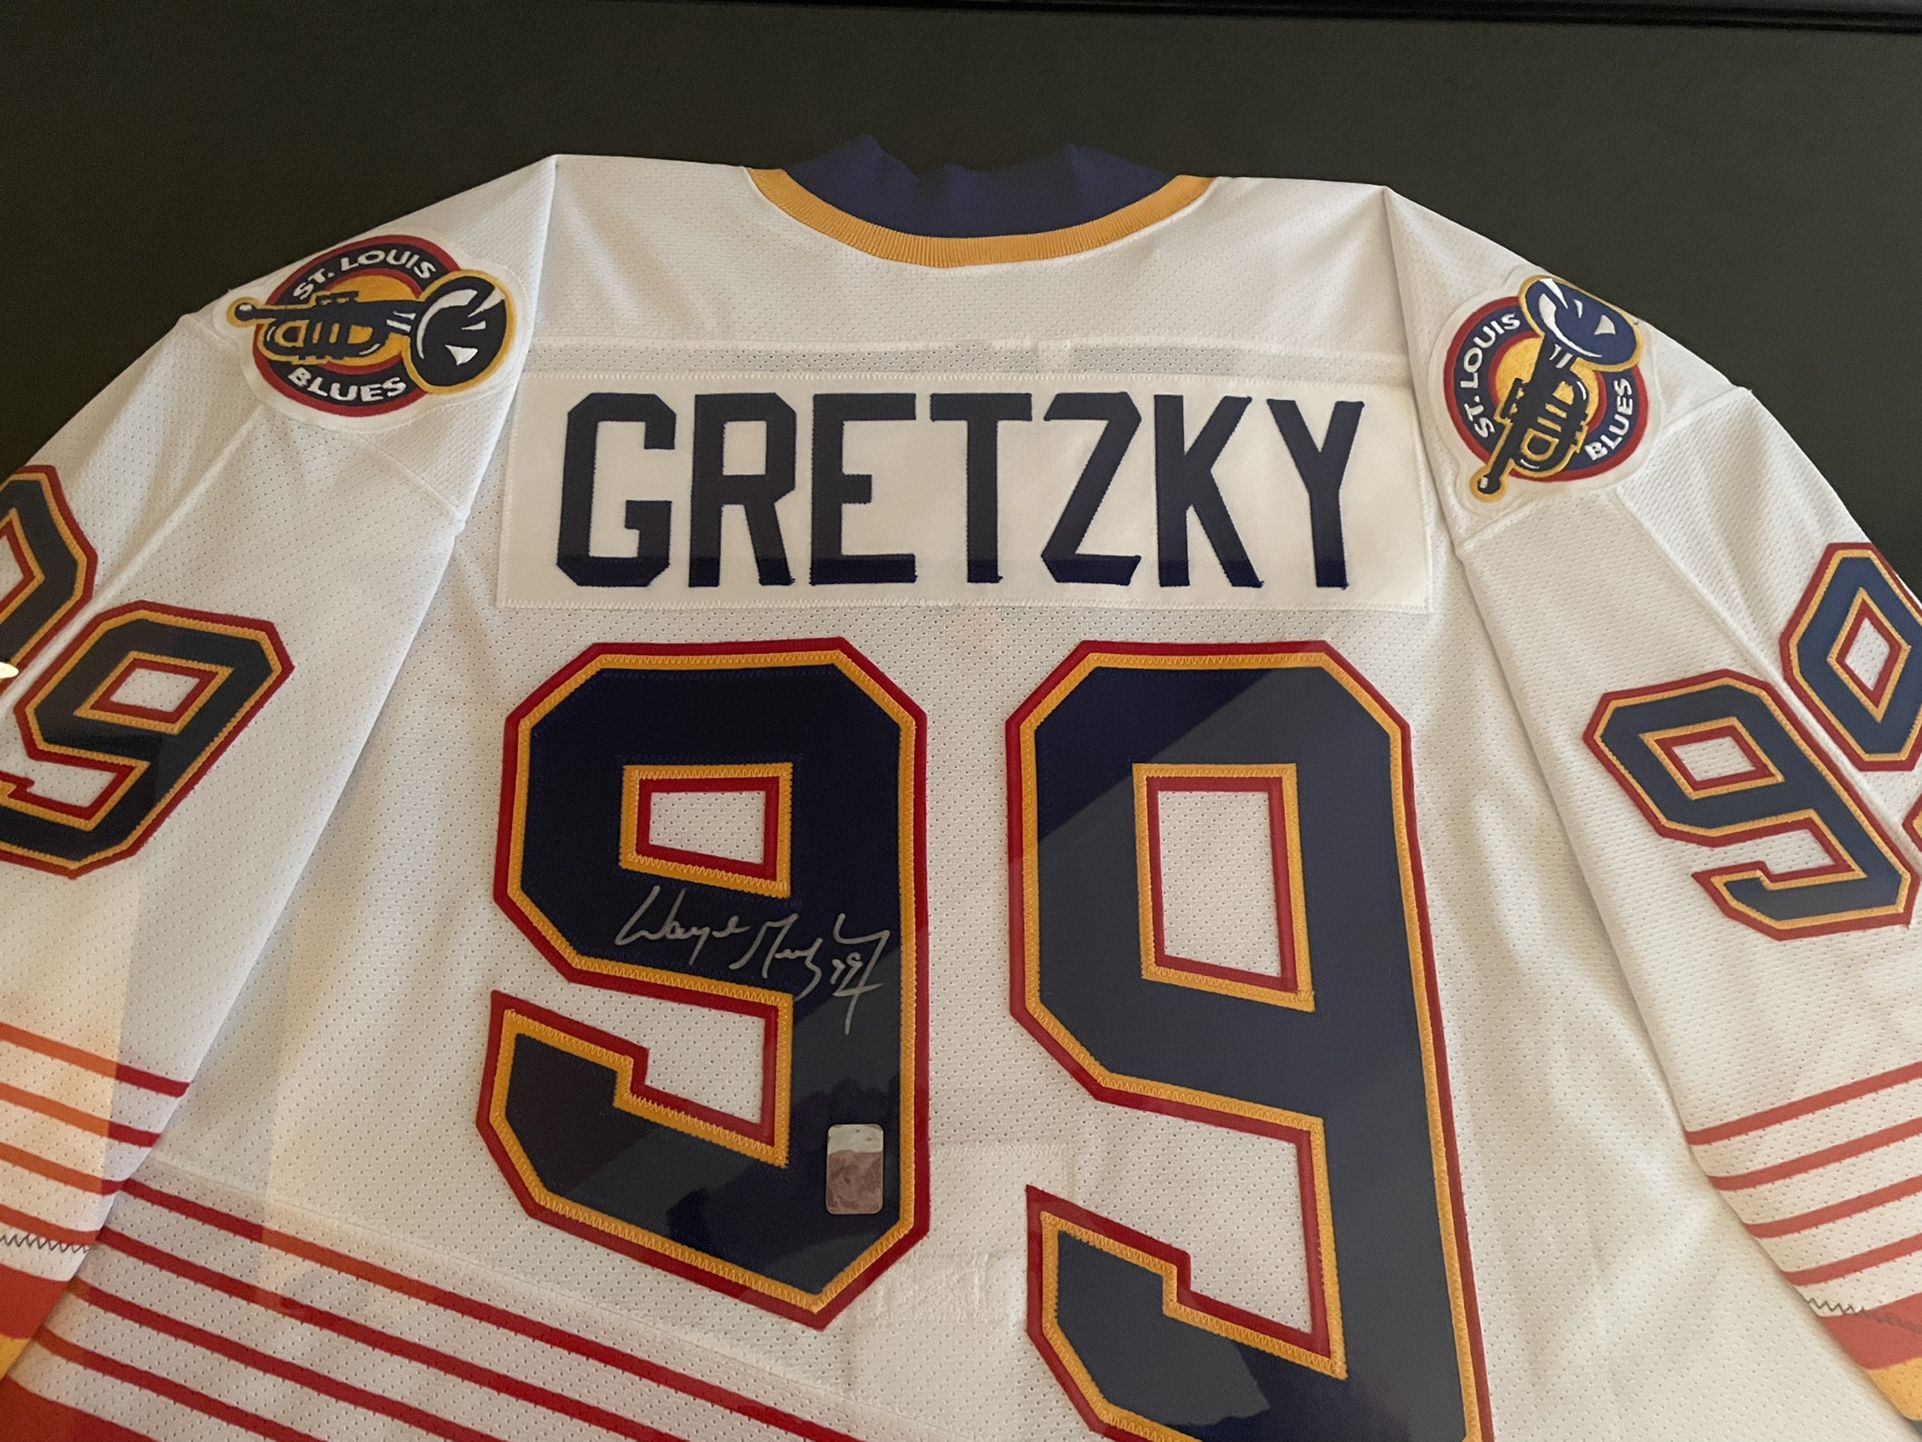 St.Louis Blues Jersey for Sale in Florissant, MO - OfferUp